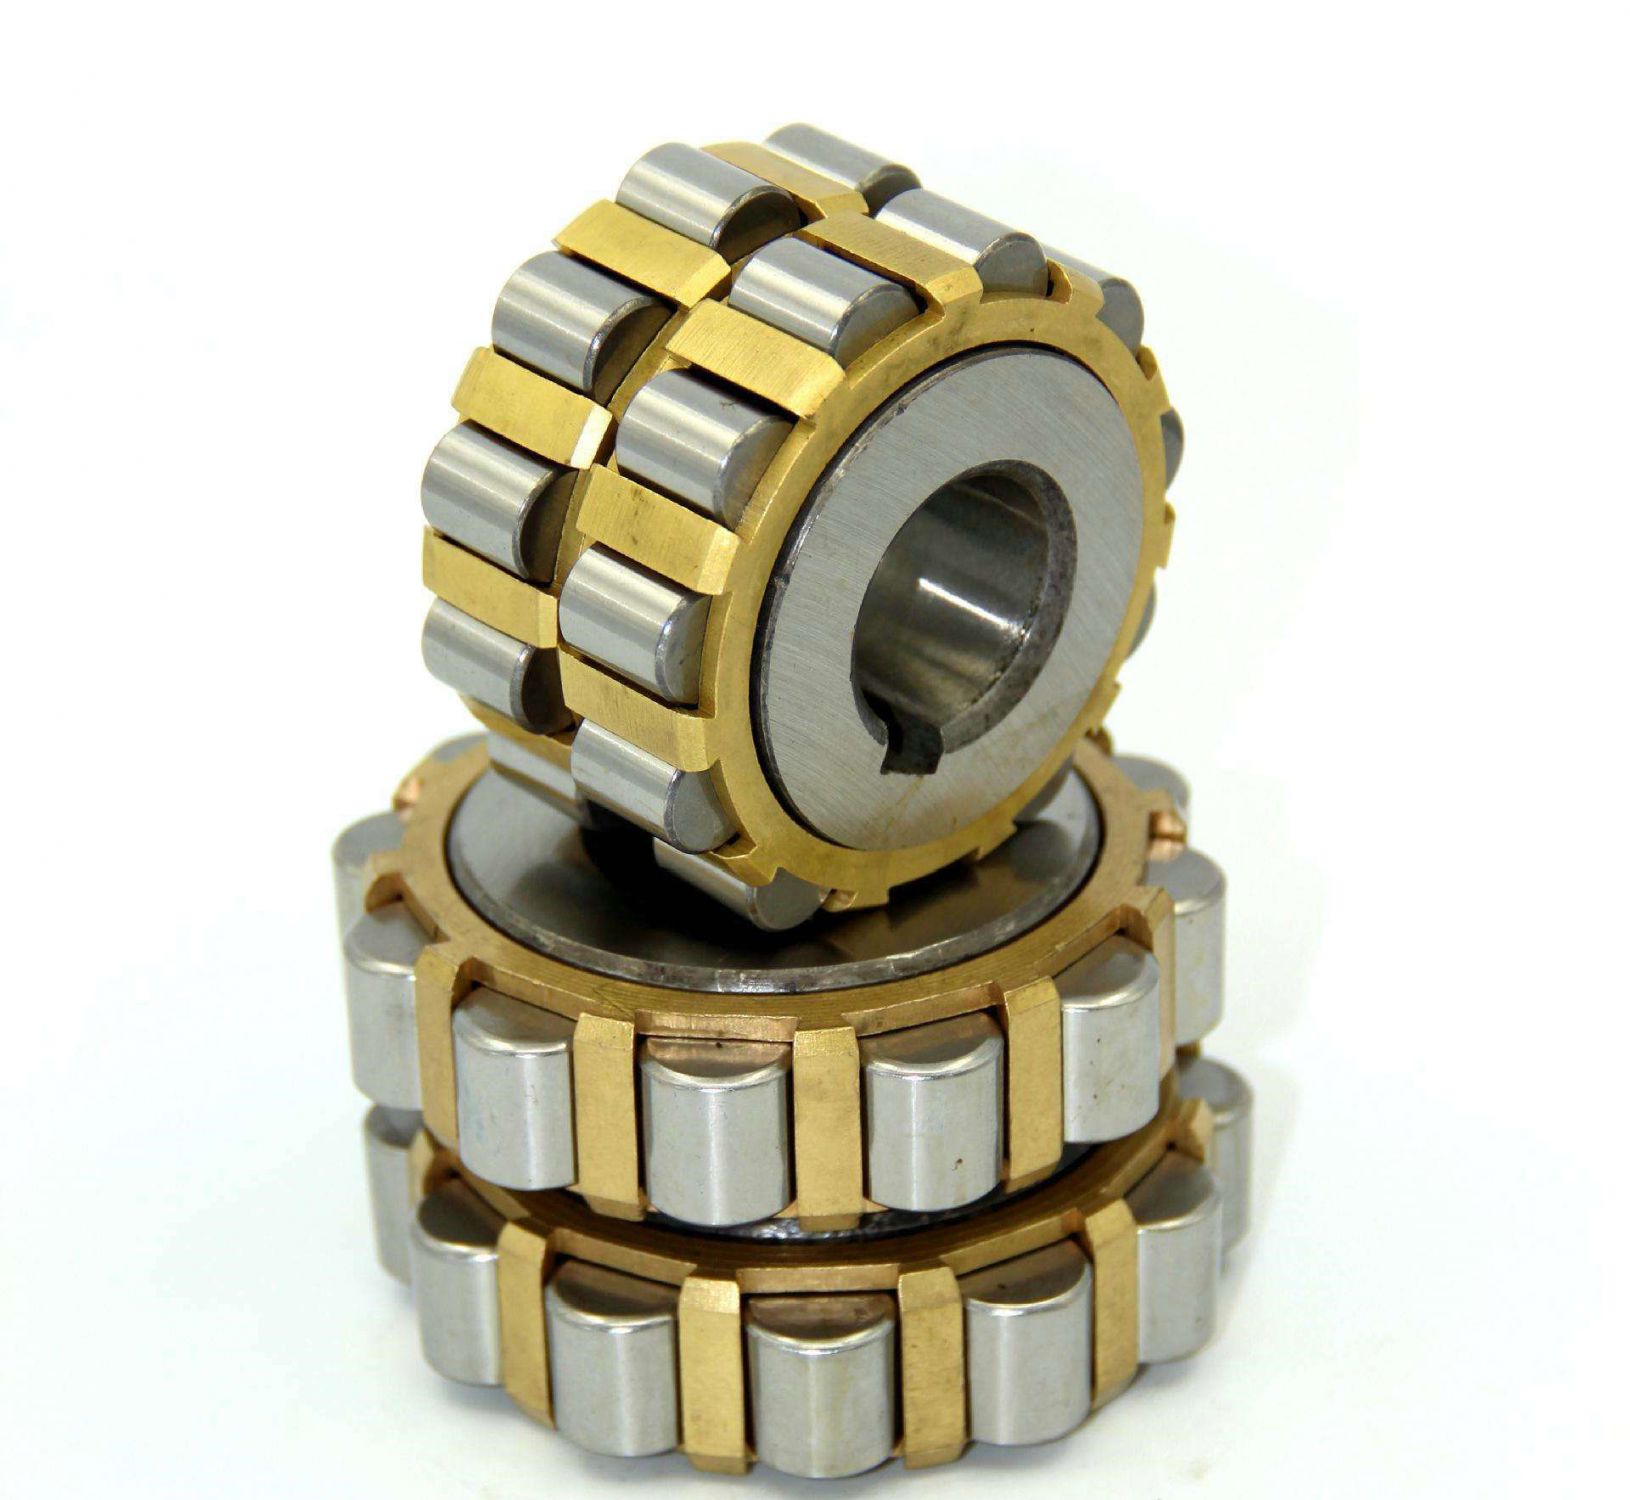 Overall eccentric bearing